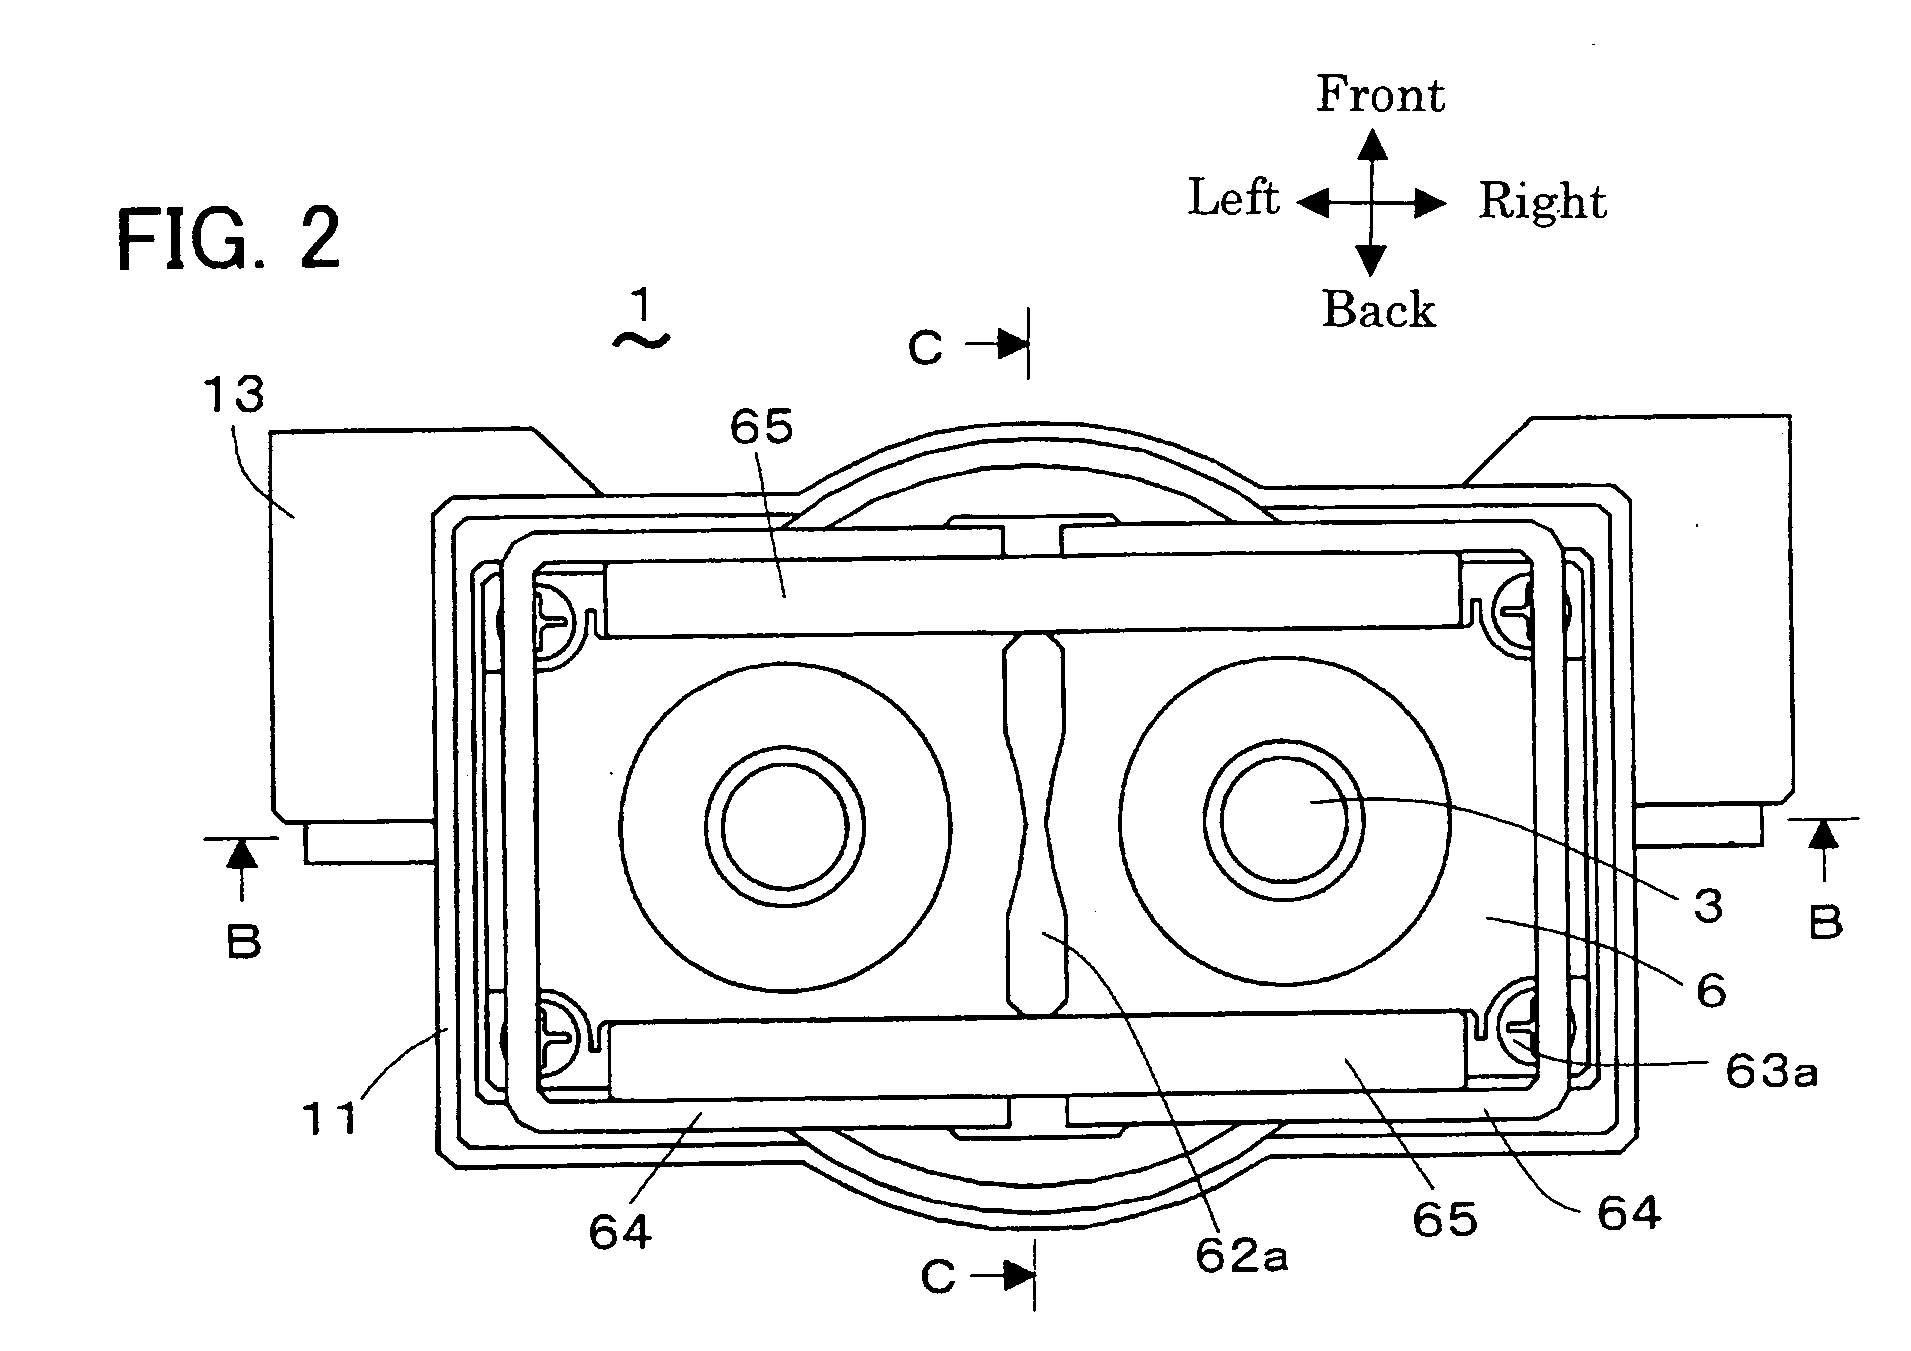 Electromagnetic switching device